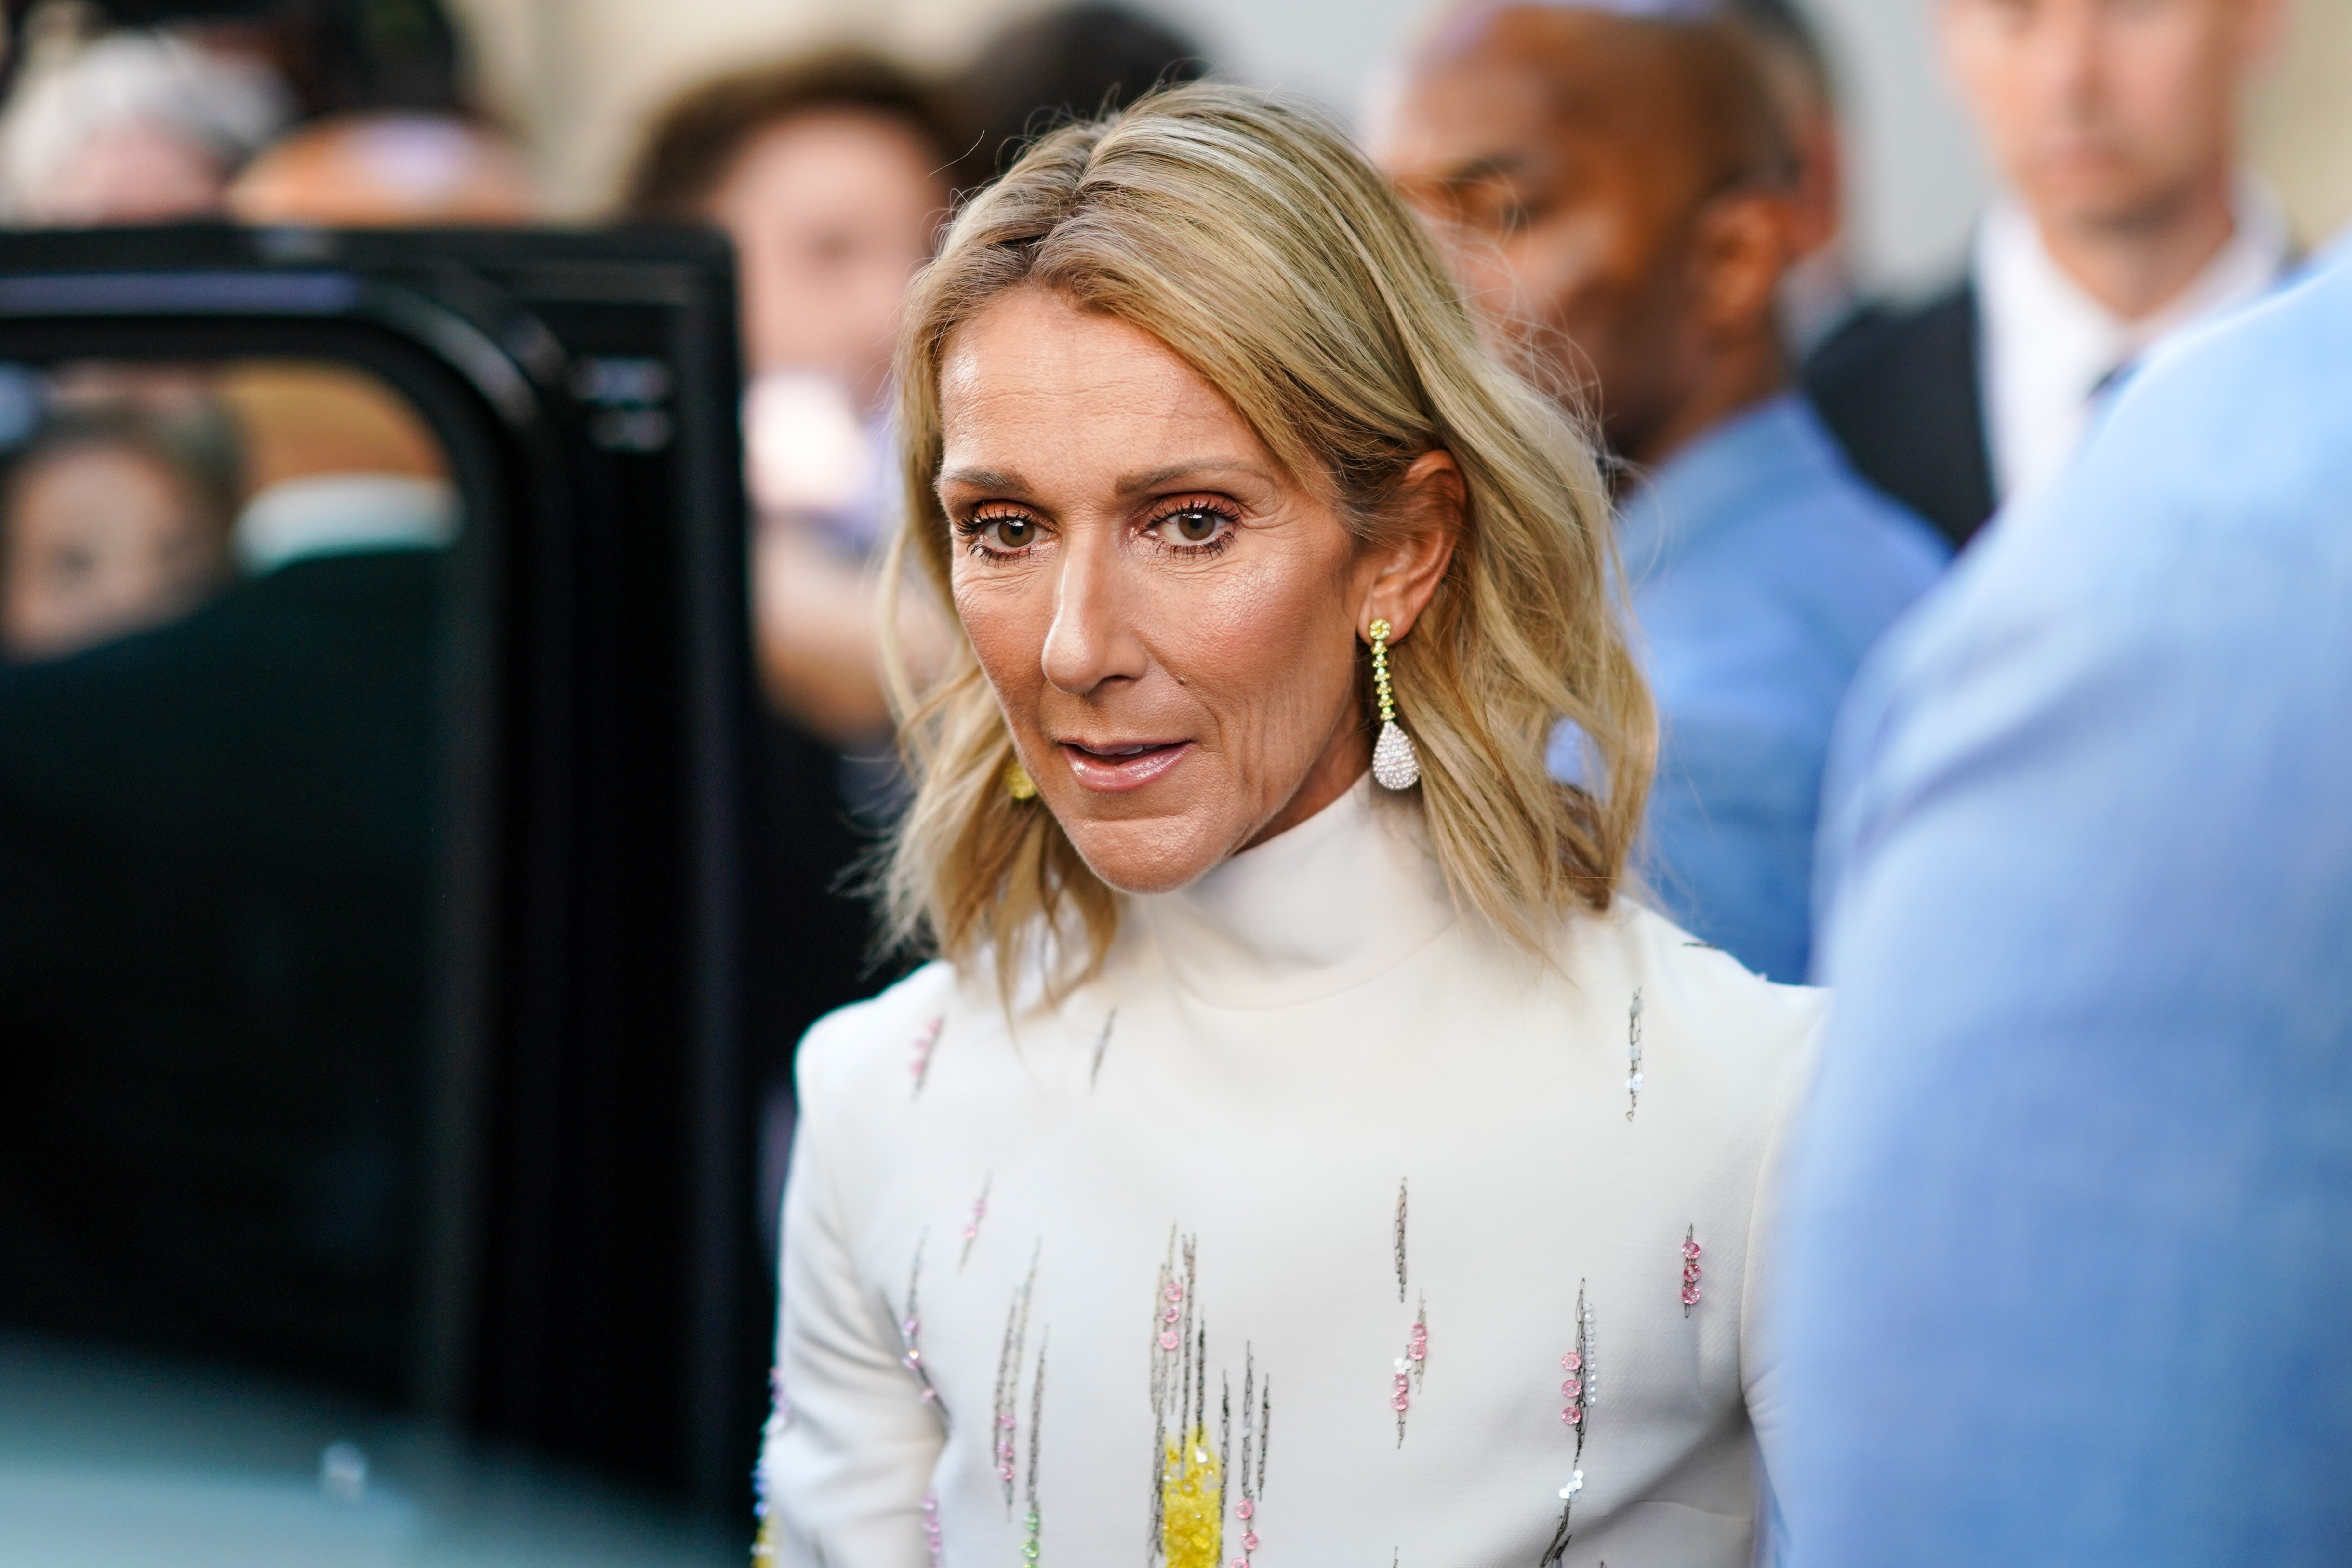 Celine Dion is seen outside Valentino, during Paris Fashion Week Haute Couture Fall/Winter 2019/20, in Paris, France, on July 3, 2019 | Source: Getty Images